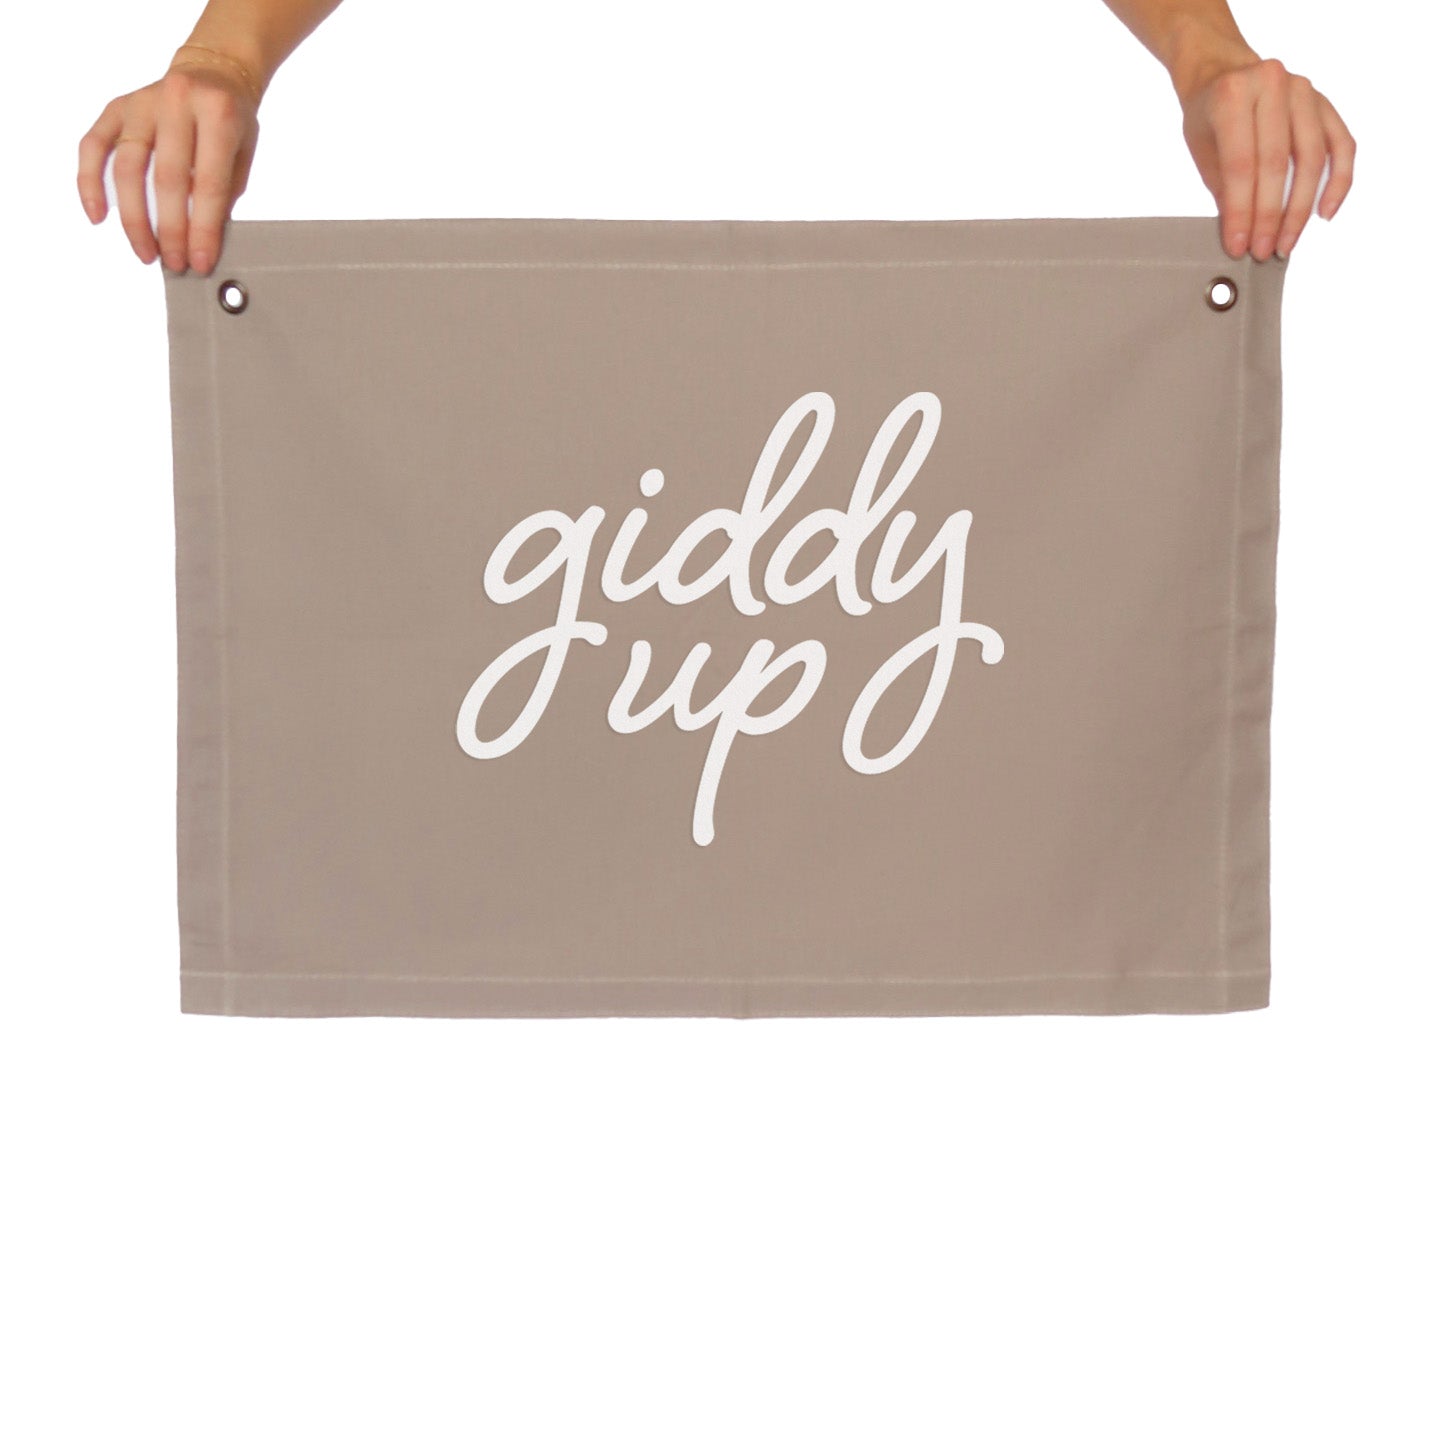 Giddy Up Large Canvas Flag